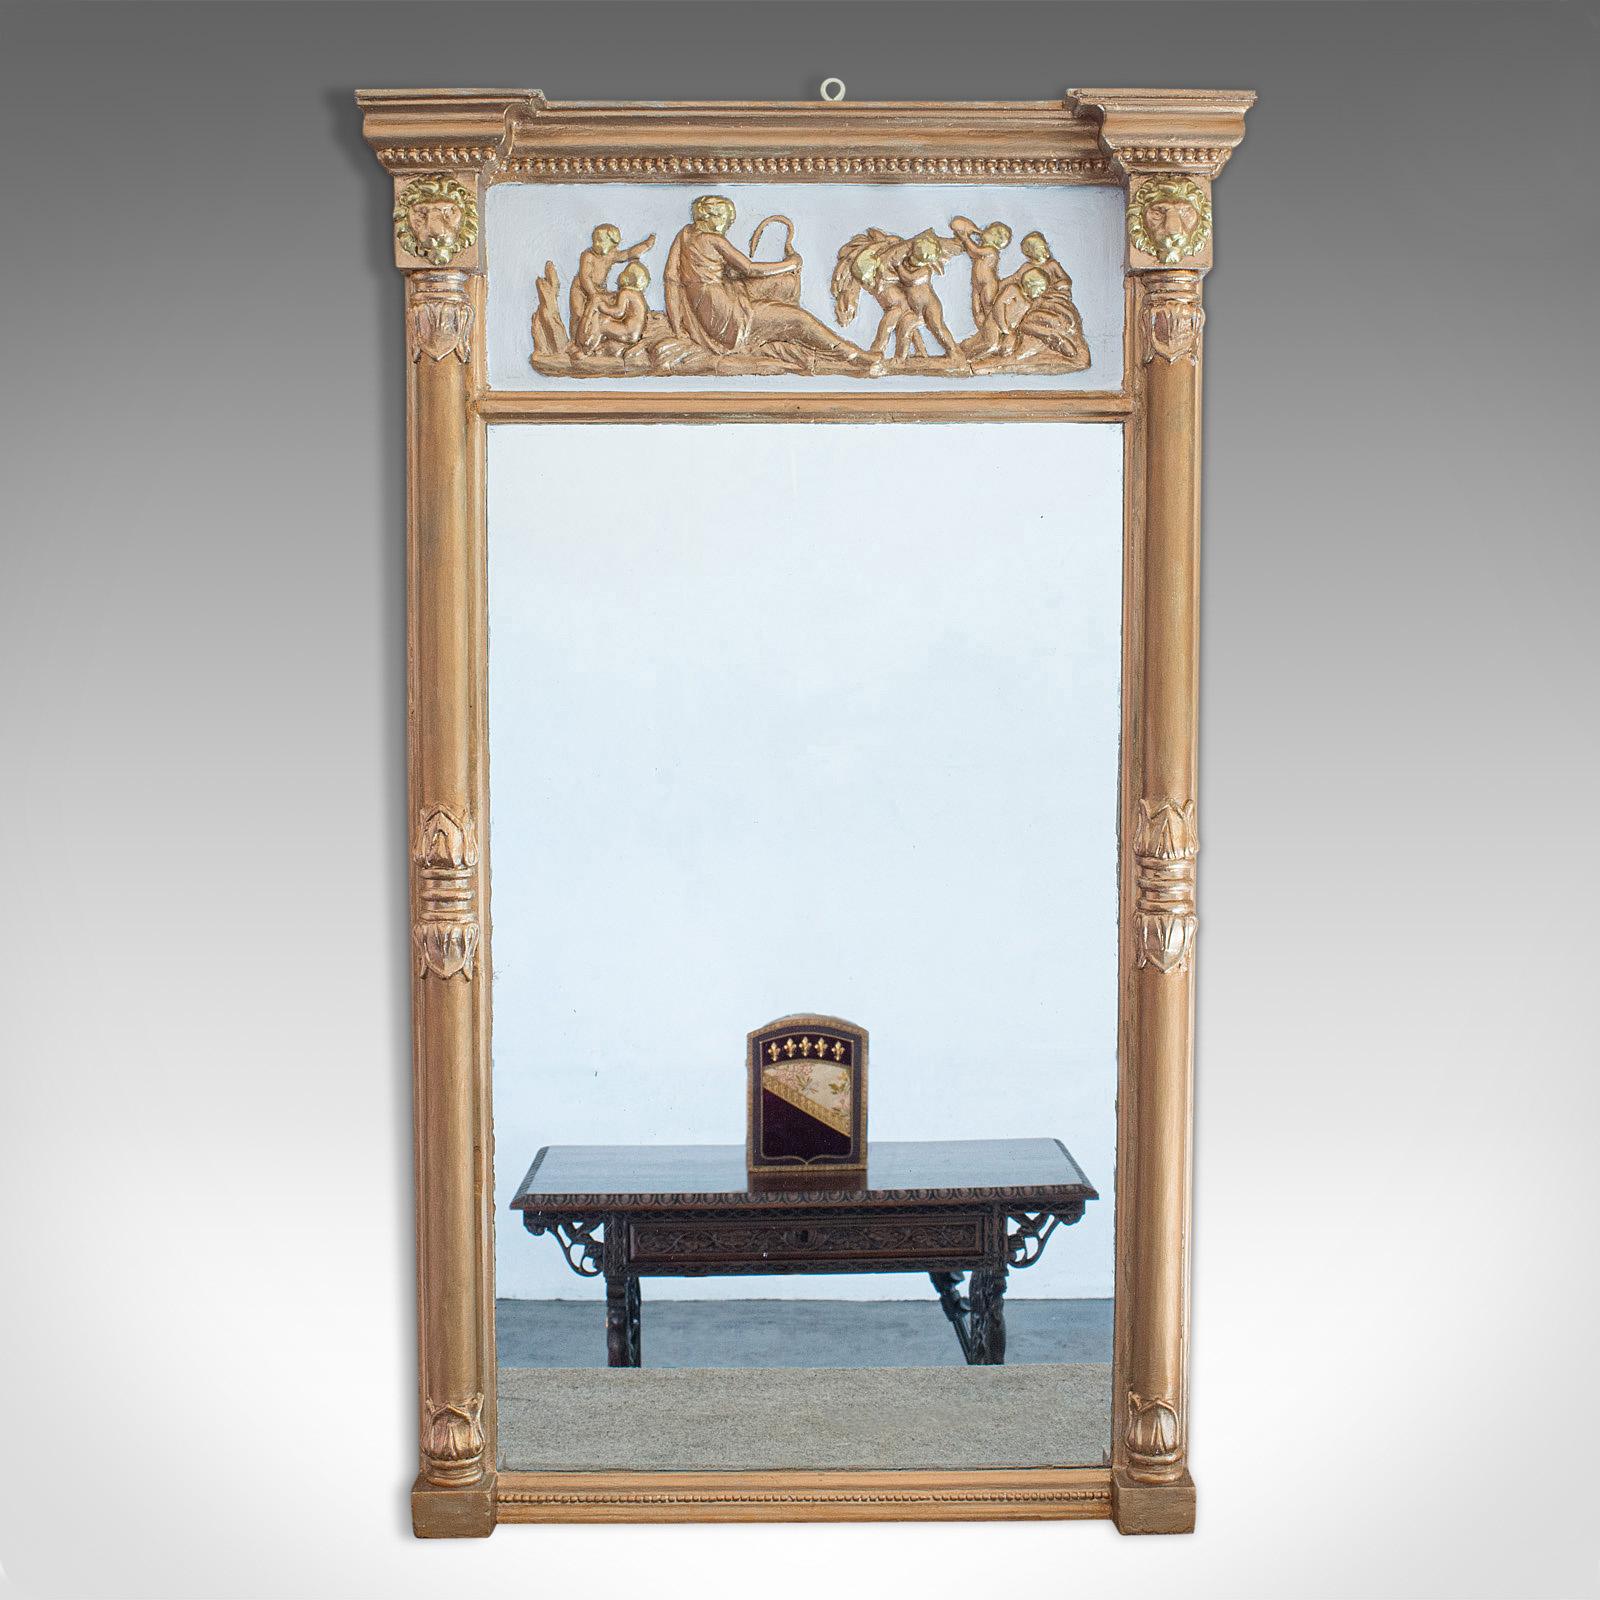 This is an antique pier glass mirror. An English, gilt gesso mirror in Classical taste, dating to the Regency period, circa 1820.

Bold frame with overt Classical influence
Displays a desirable aged patina
Gilt Gesso in good order with rich